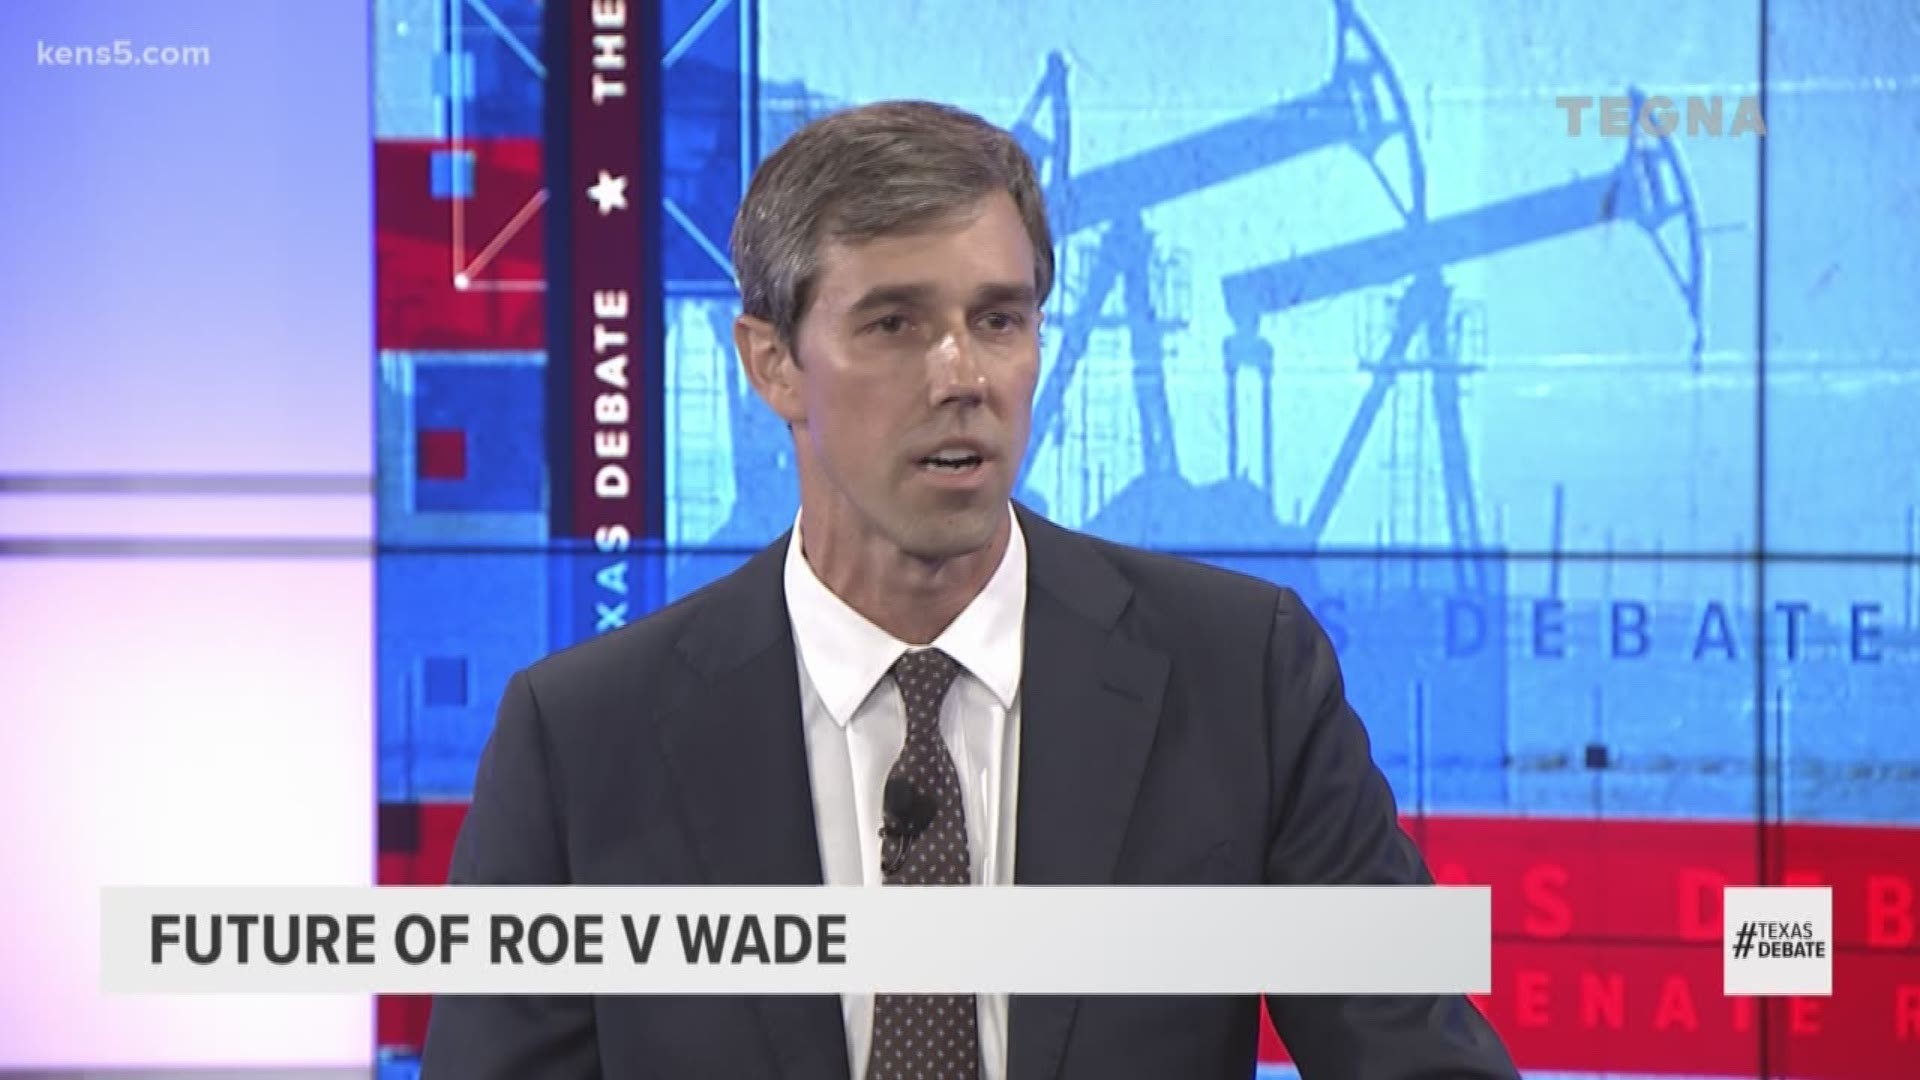 Candidate Beto O'Rourke criticizes Sen. Ted Cruz for supporting what he considers unqualified judges for seats on federal benches.